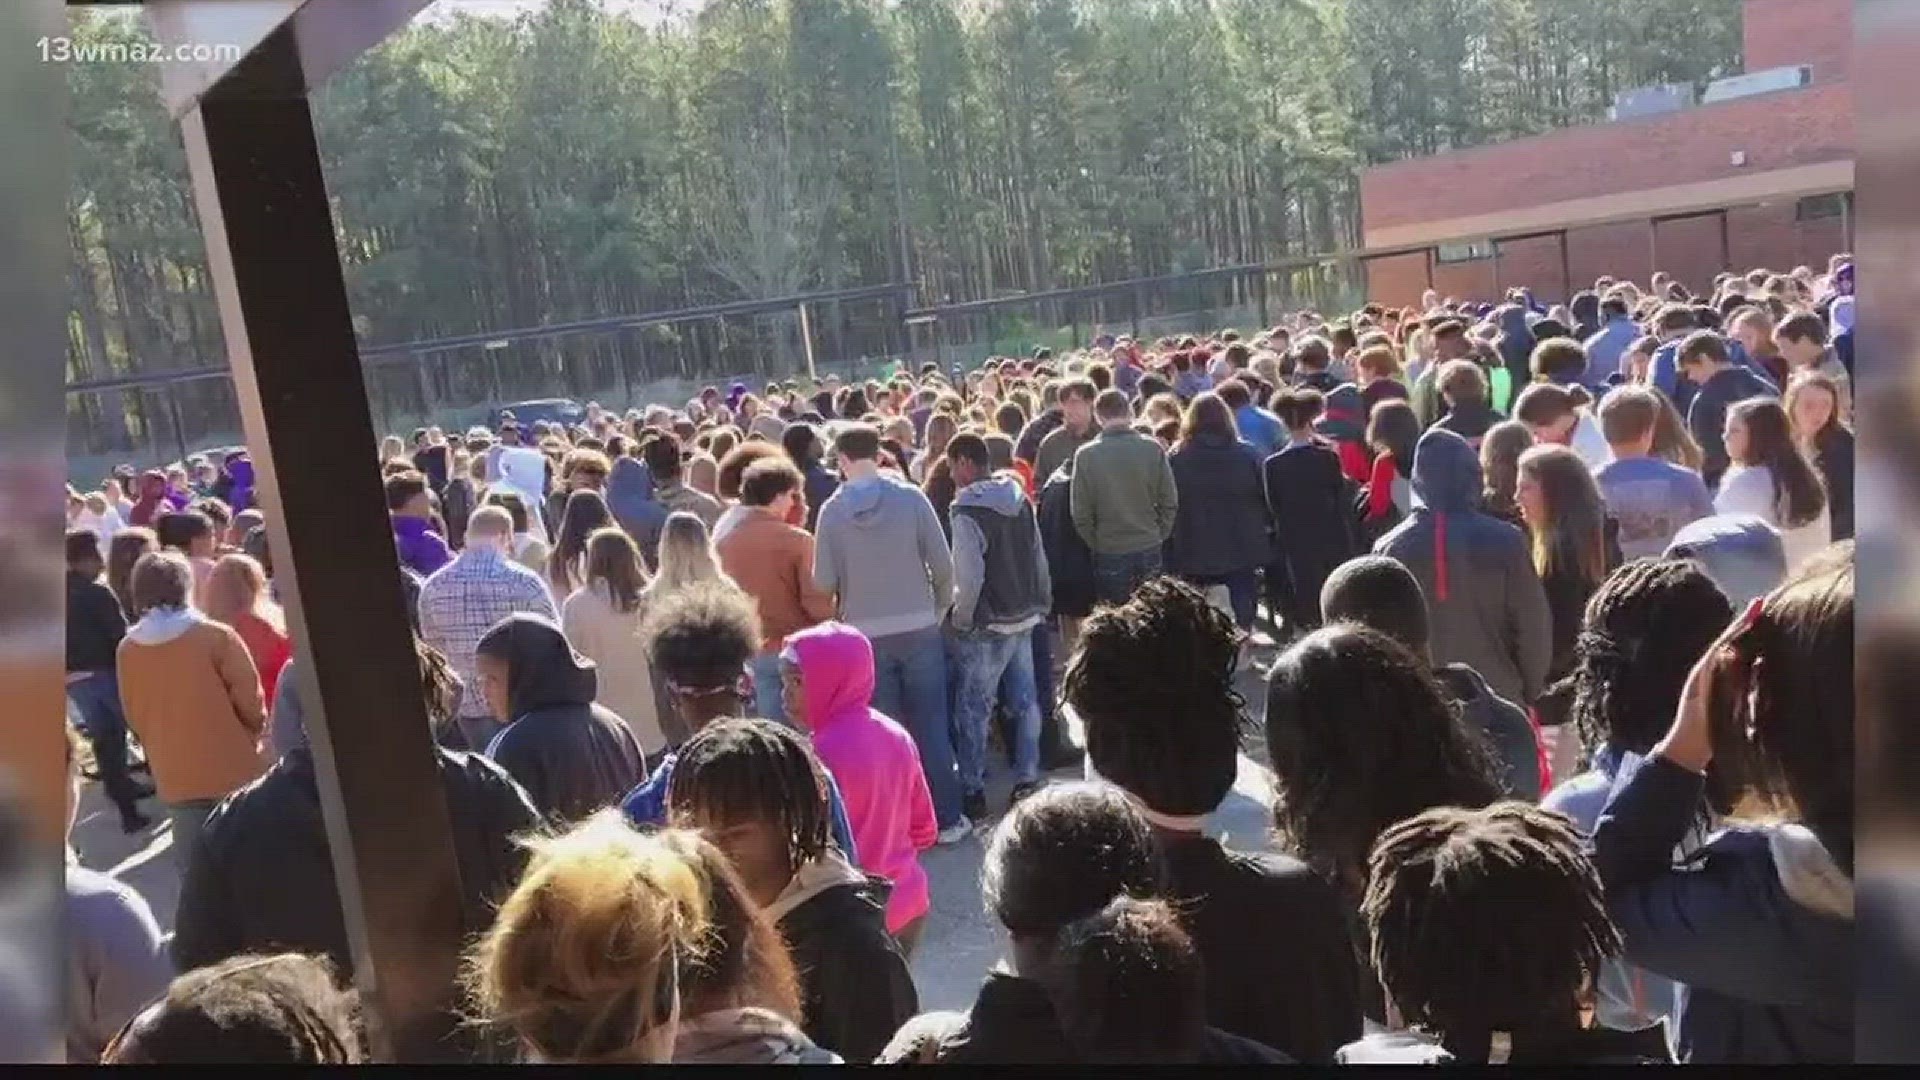 Jones County High School students participate in walkout protest